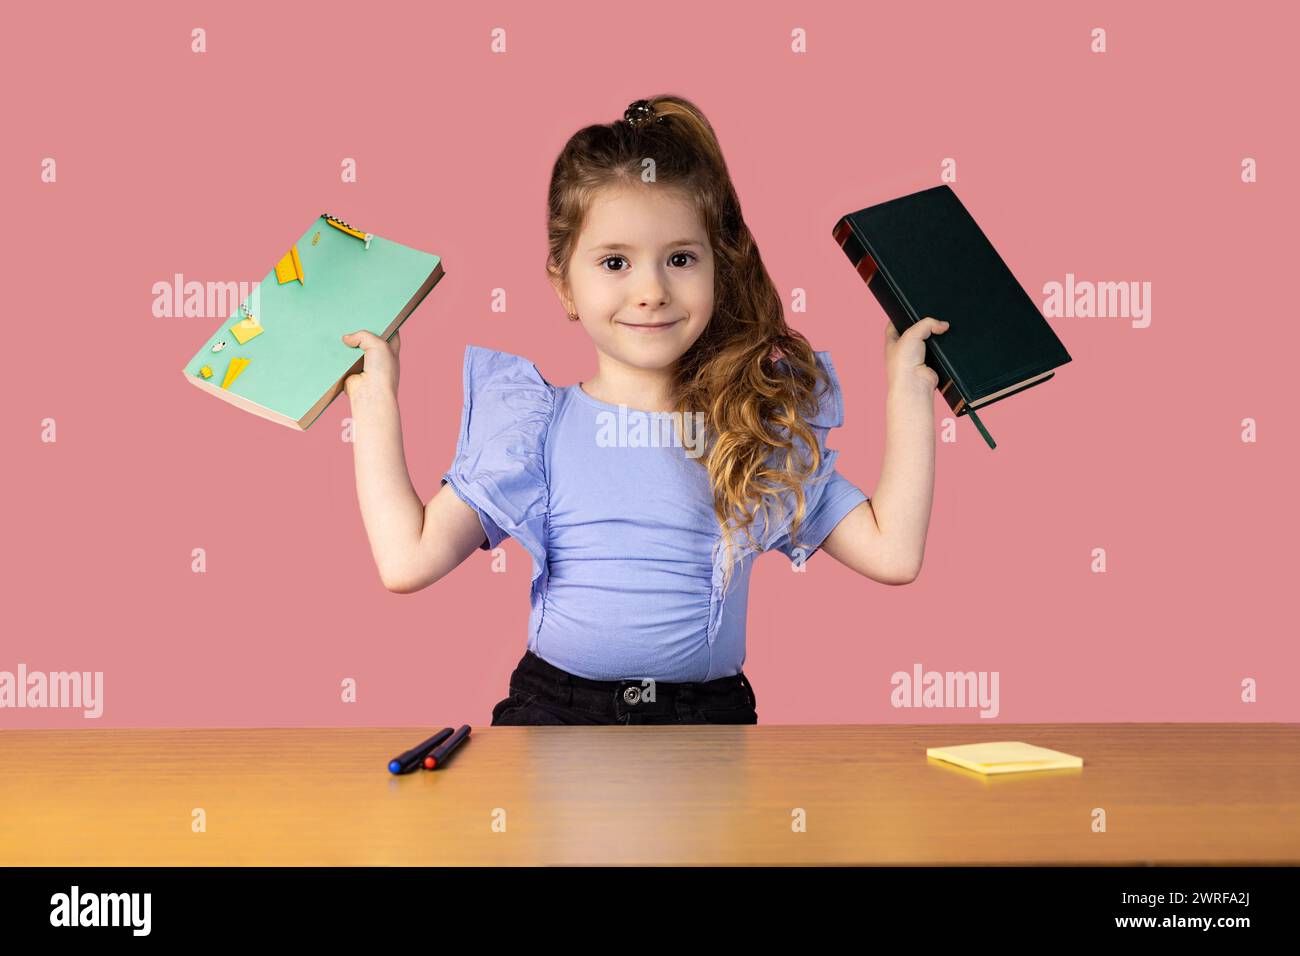 A little girl caught in a school desk holding two books showing interesting emotions, the girl loves to read books and go to school. High quality phot Stock Photo